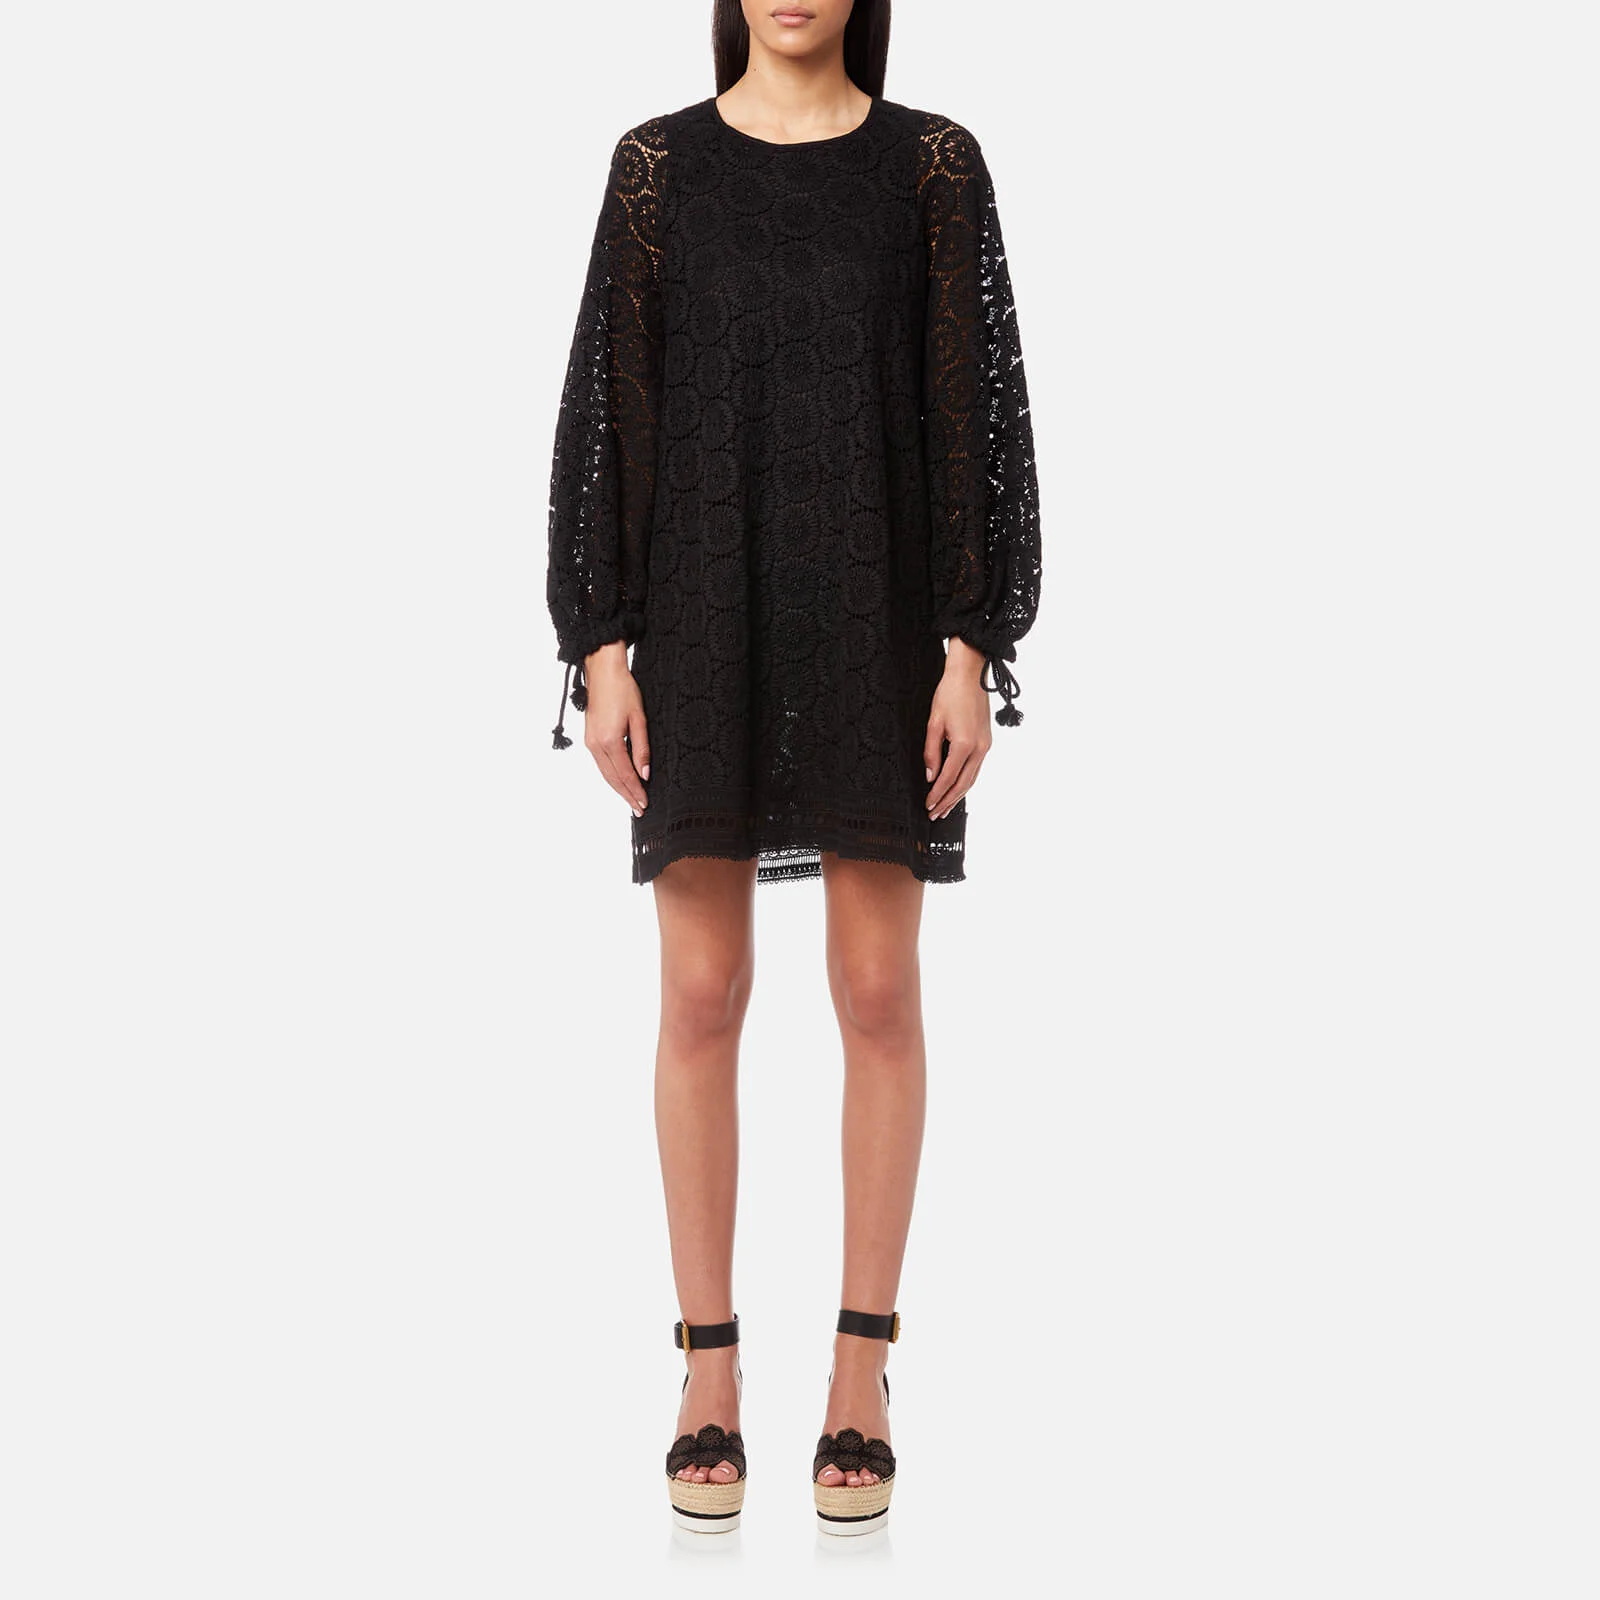 See By Chloé Women's Ornament Lace Dress - Black Image 1